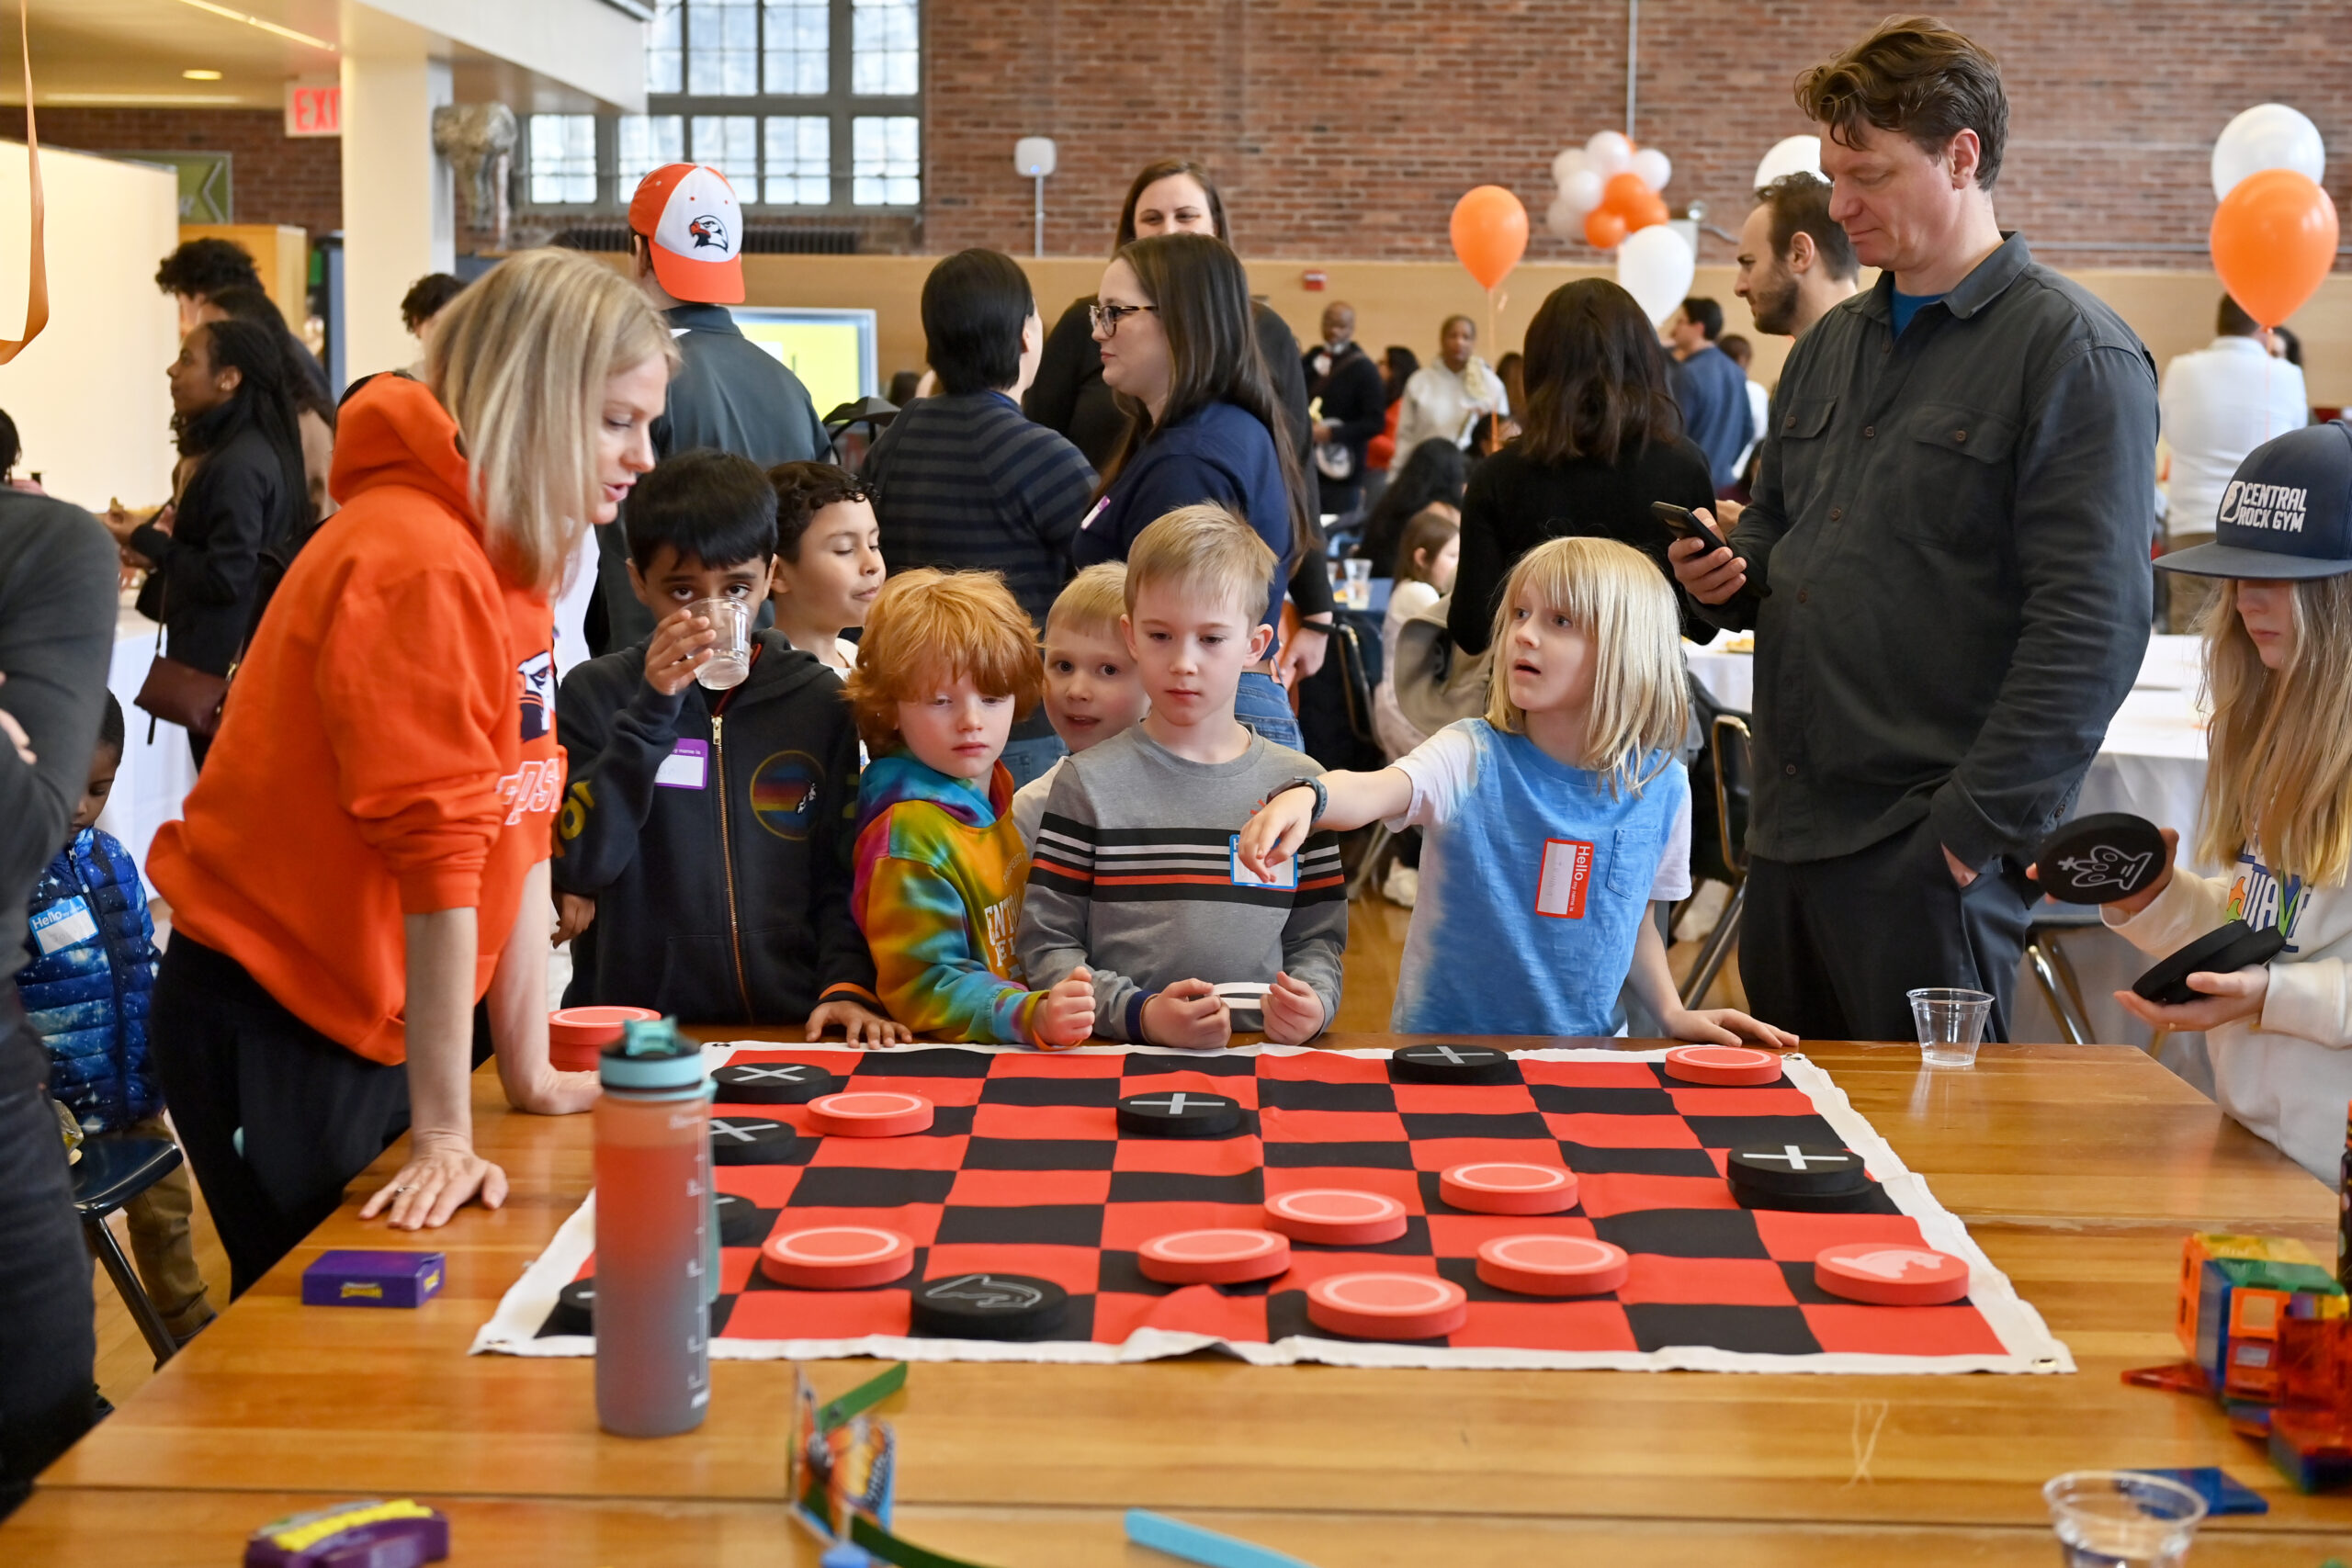 A group of students plays with a giant checkerboard as two adults watch